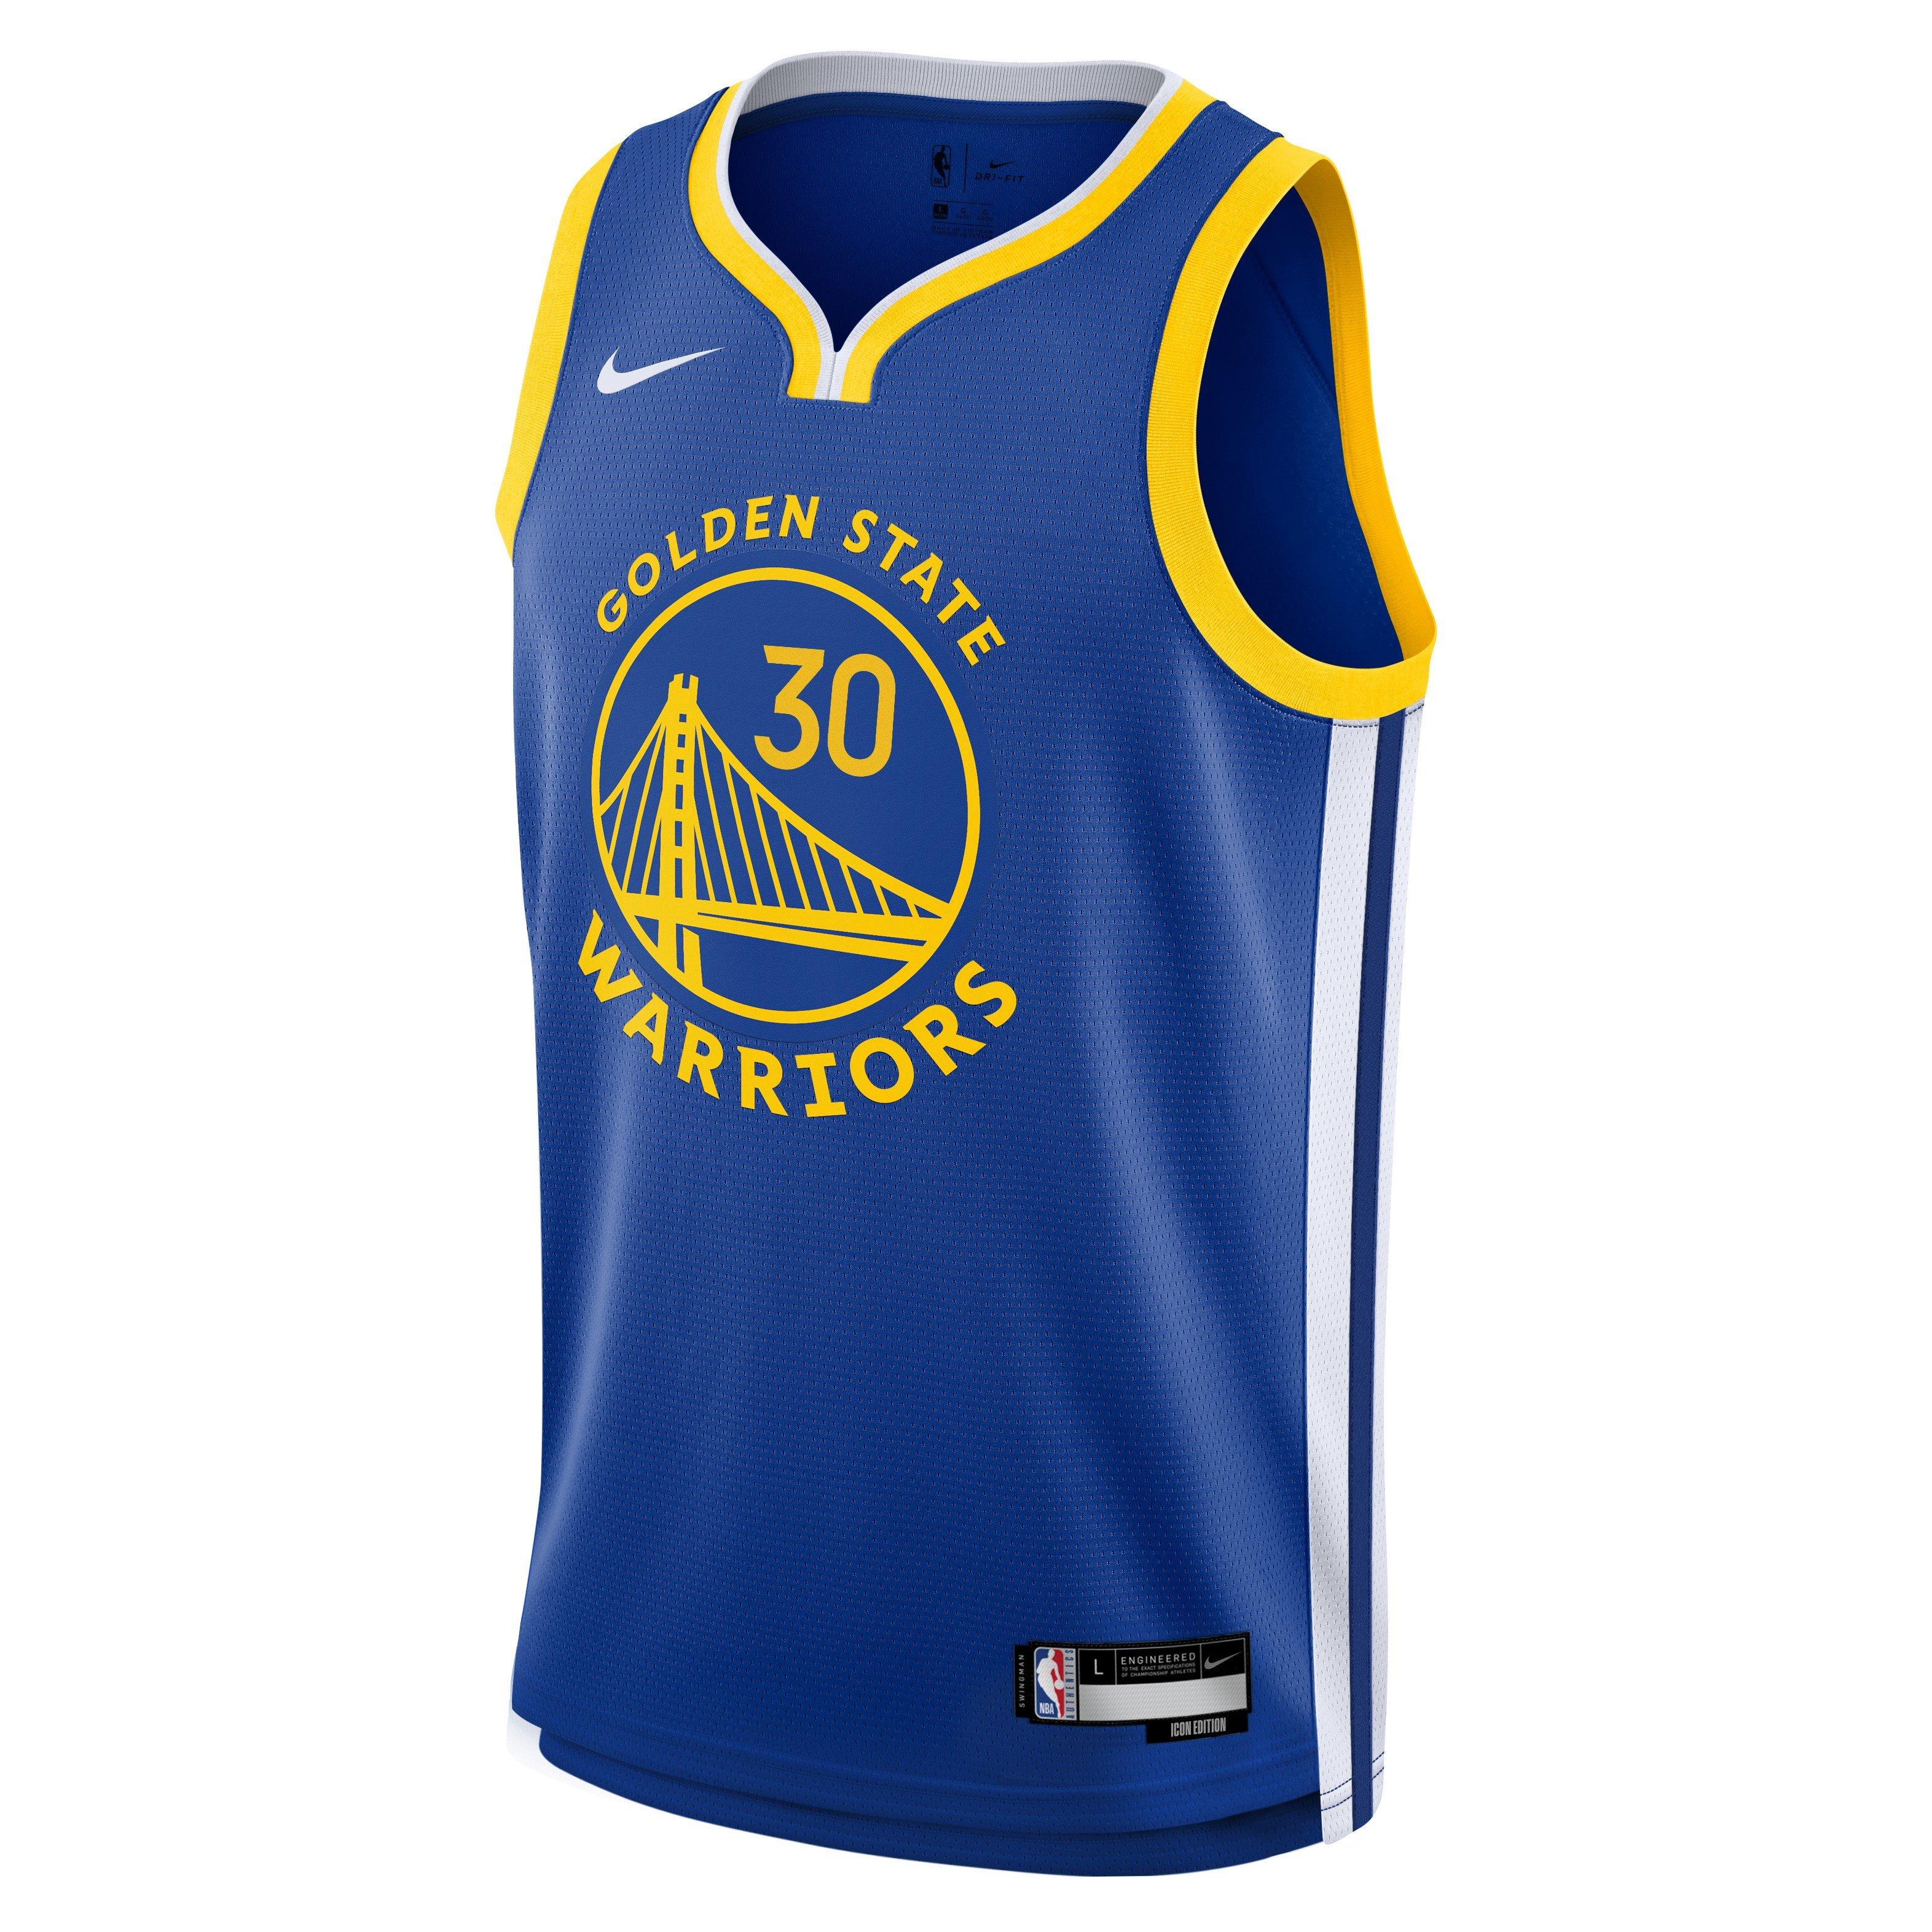 stephen curry youth jersey near me